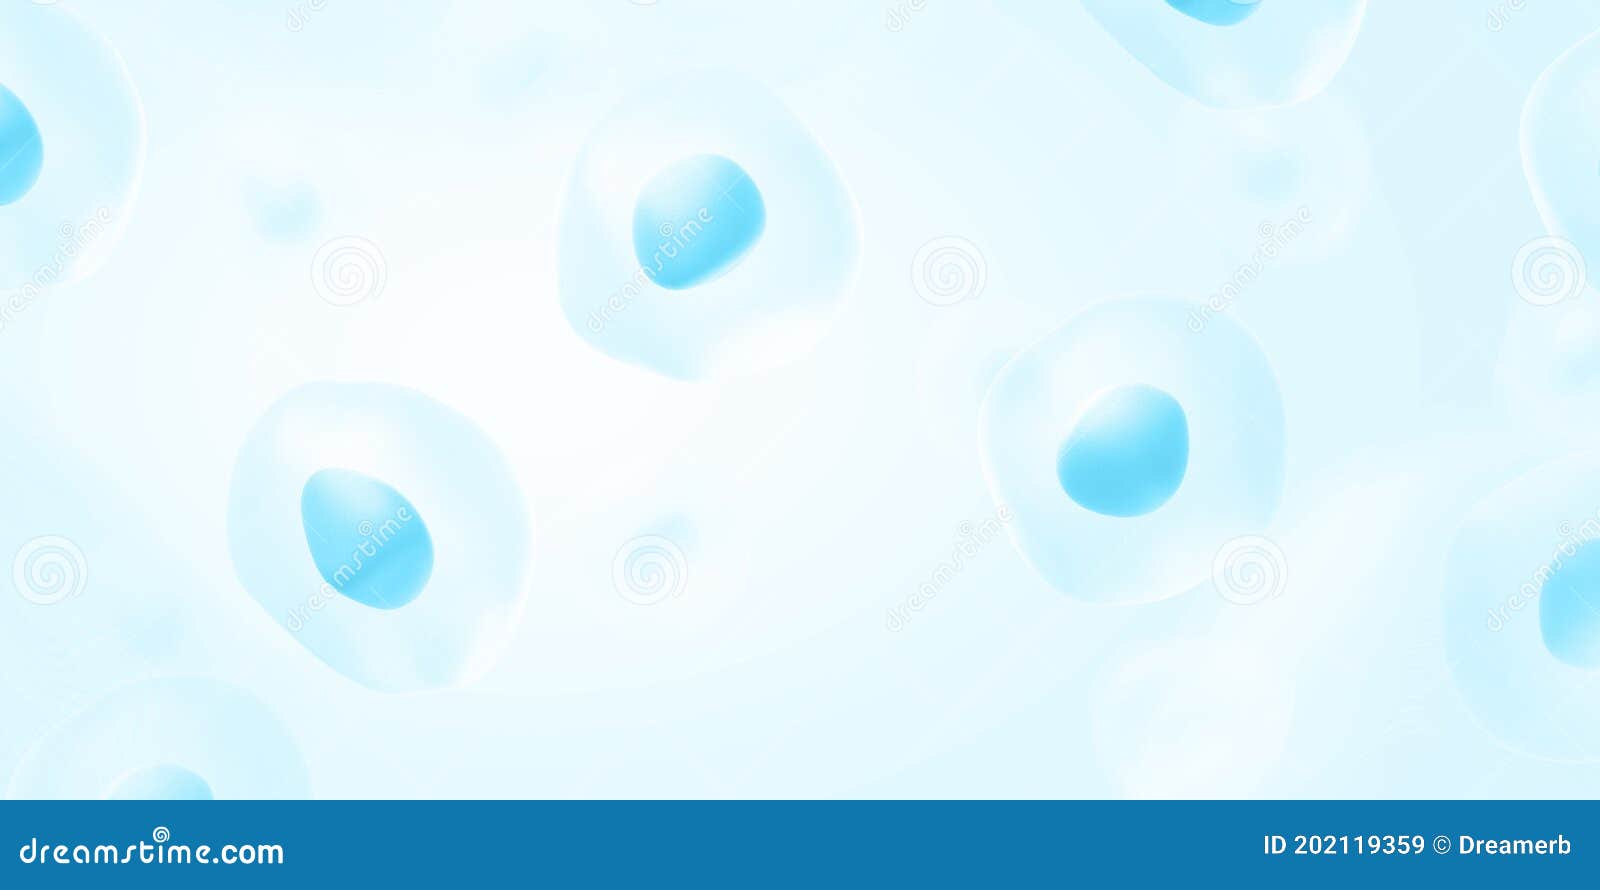 human cells on light blue background. nucleus and cytoplasm.